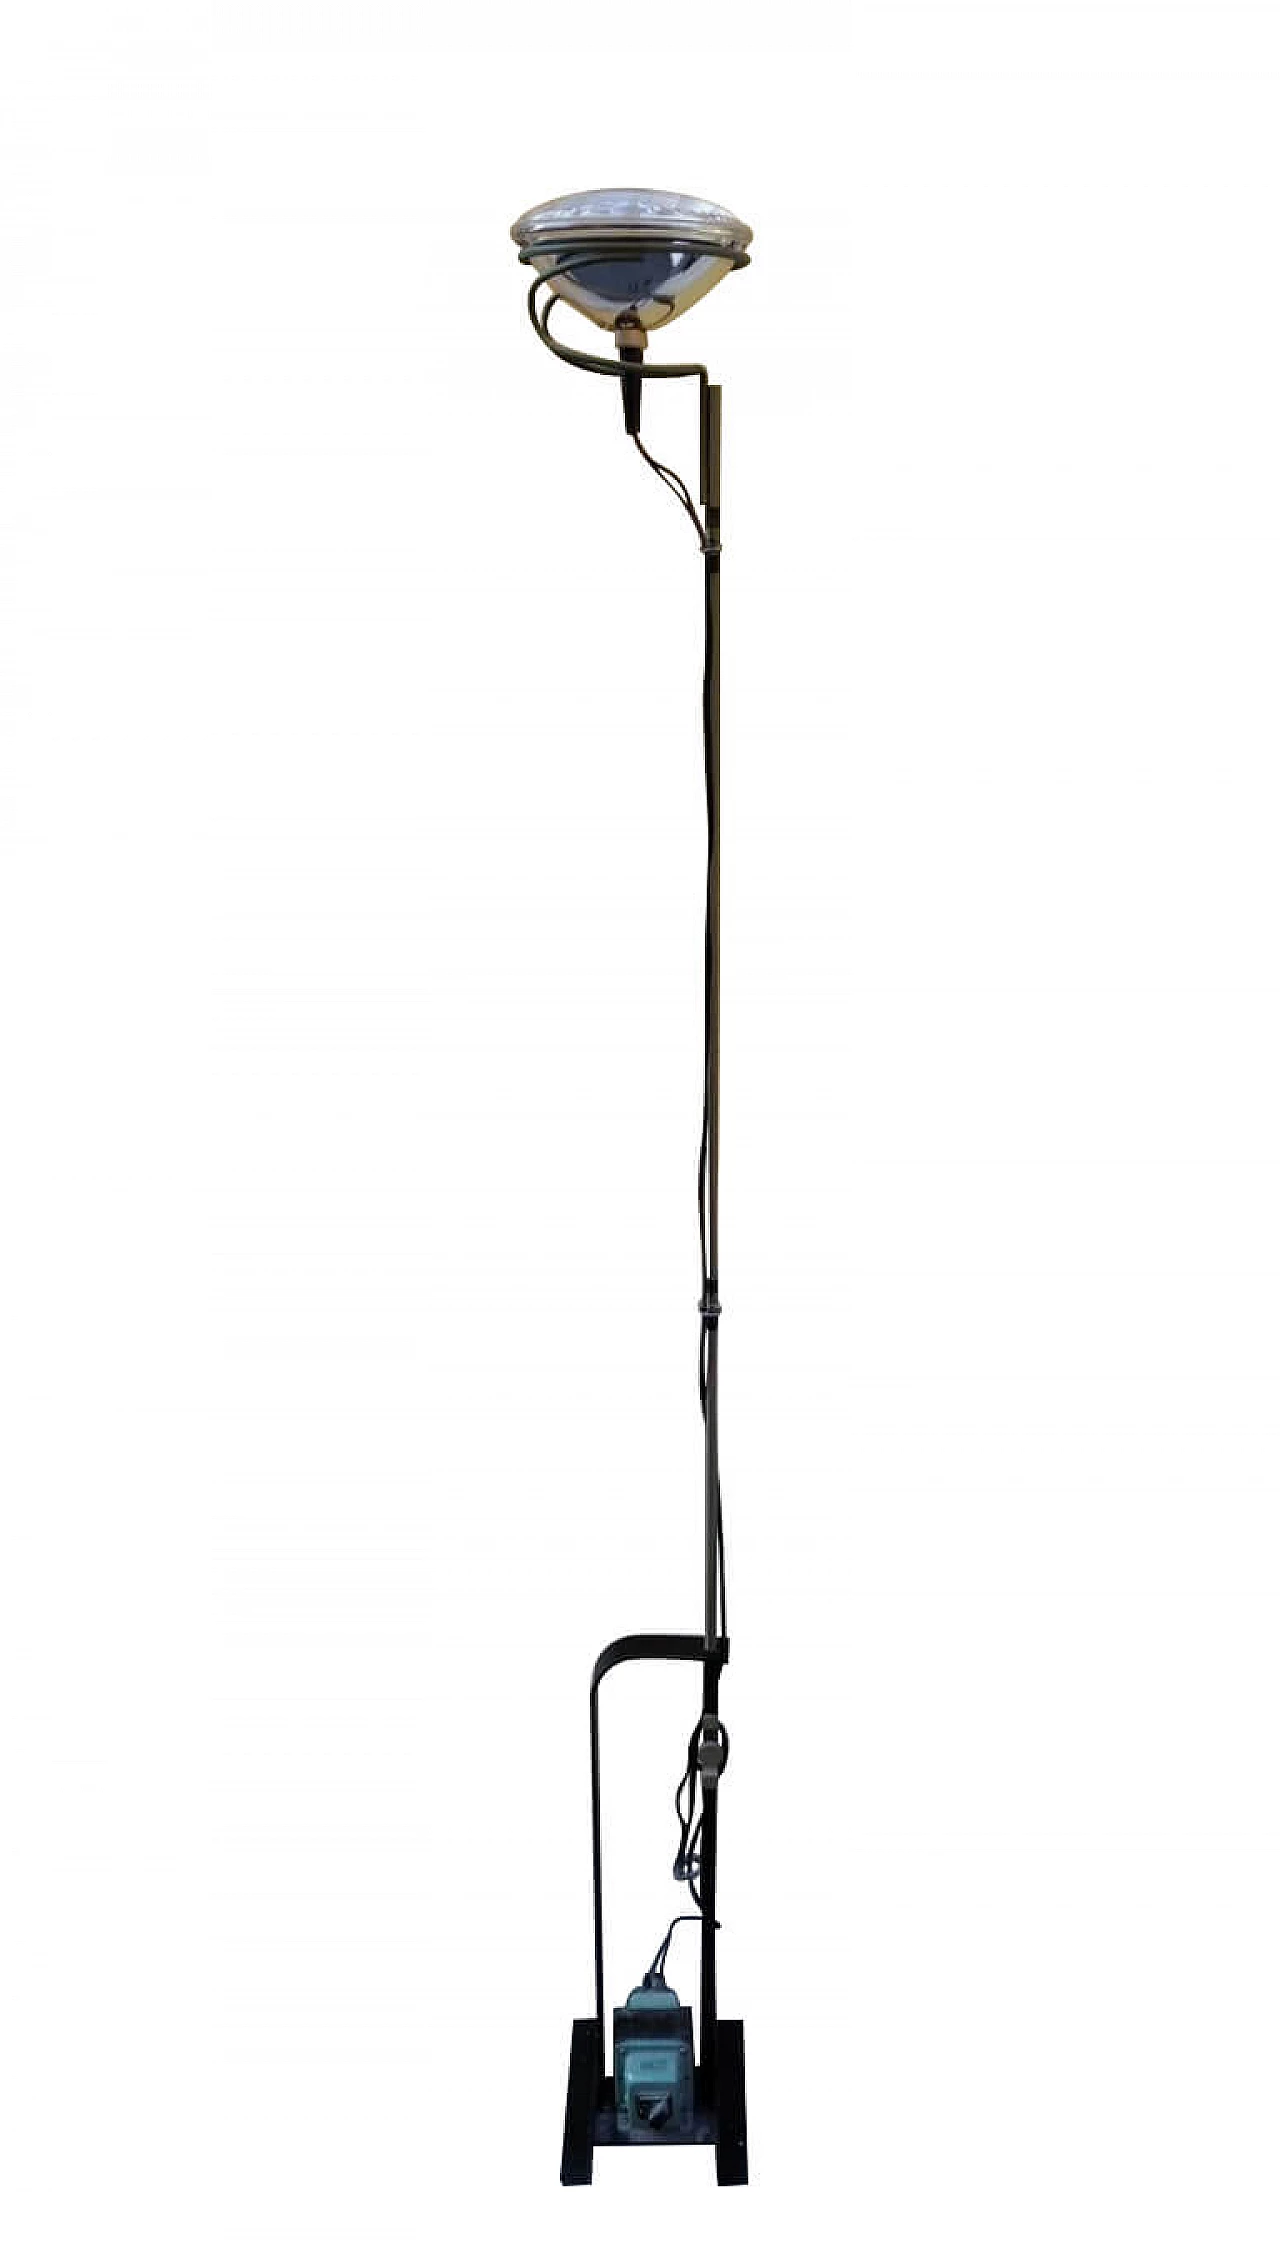 Toio floor lamp by Achille Castiglioni for Flos, 70s, available 2 1105649